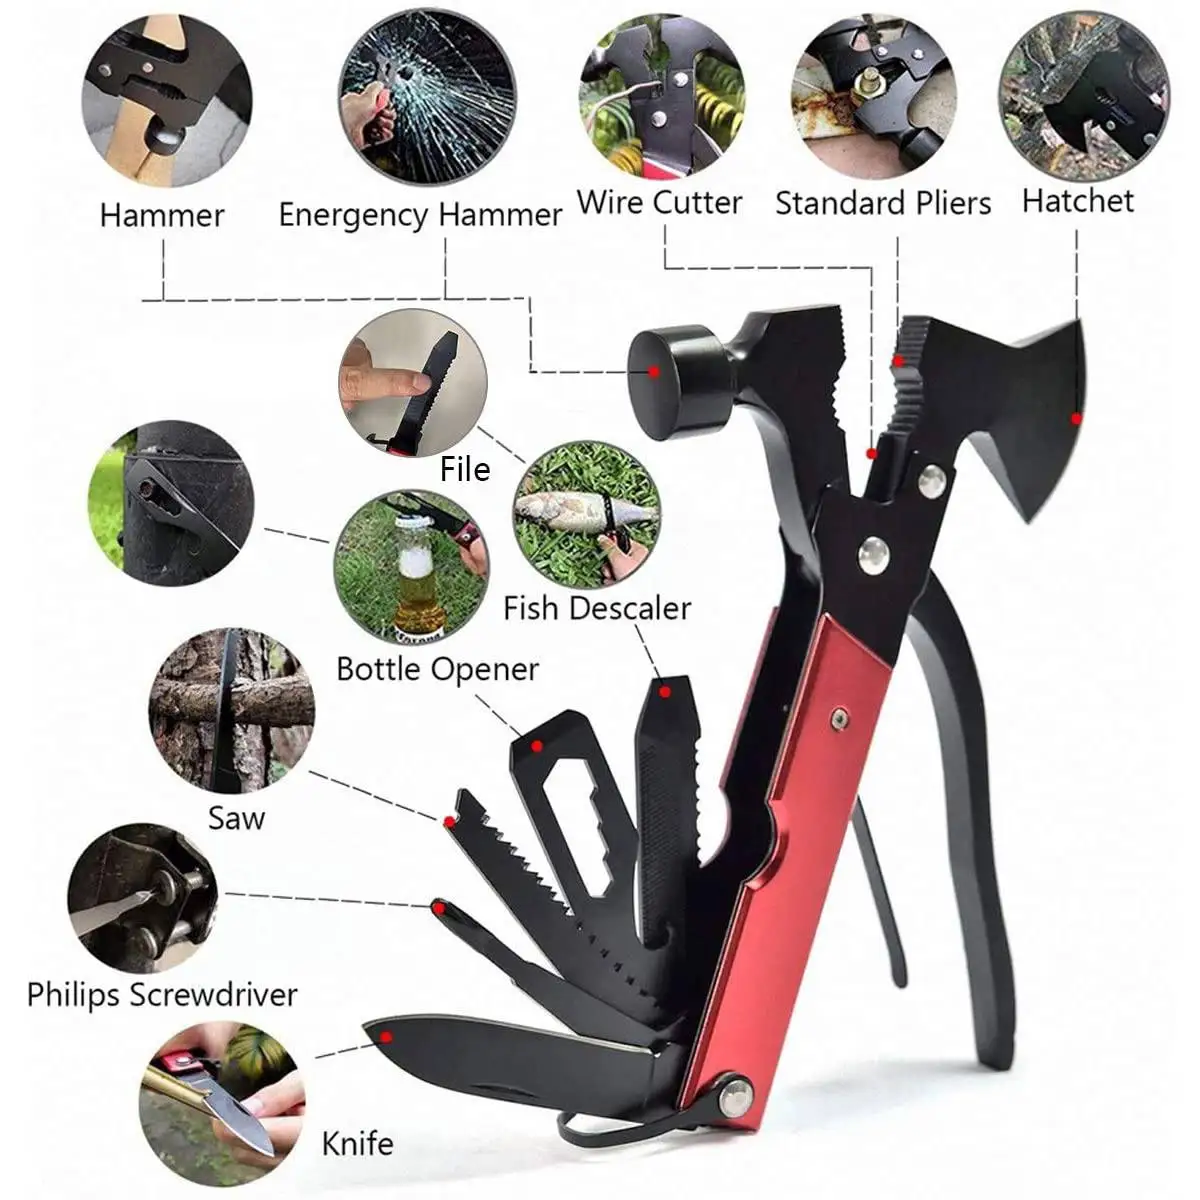 

14 in 1 EDC Folding Multi Tools Ax Hatchet Wooden Handle Fire Heavy Duty Twin Hammer Pocket Saw Screwdrivers Pliers for Outdoor